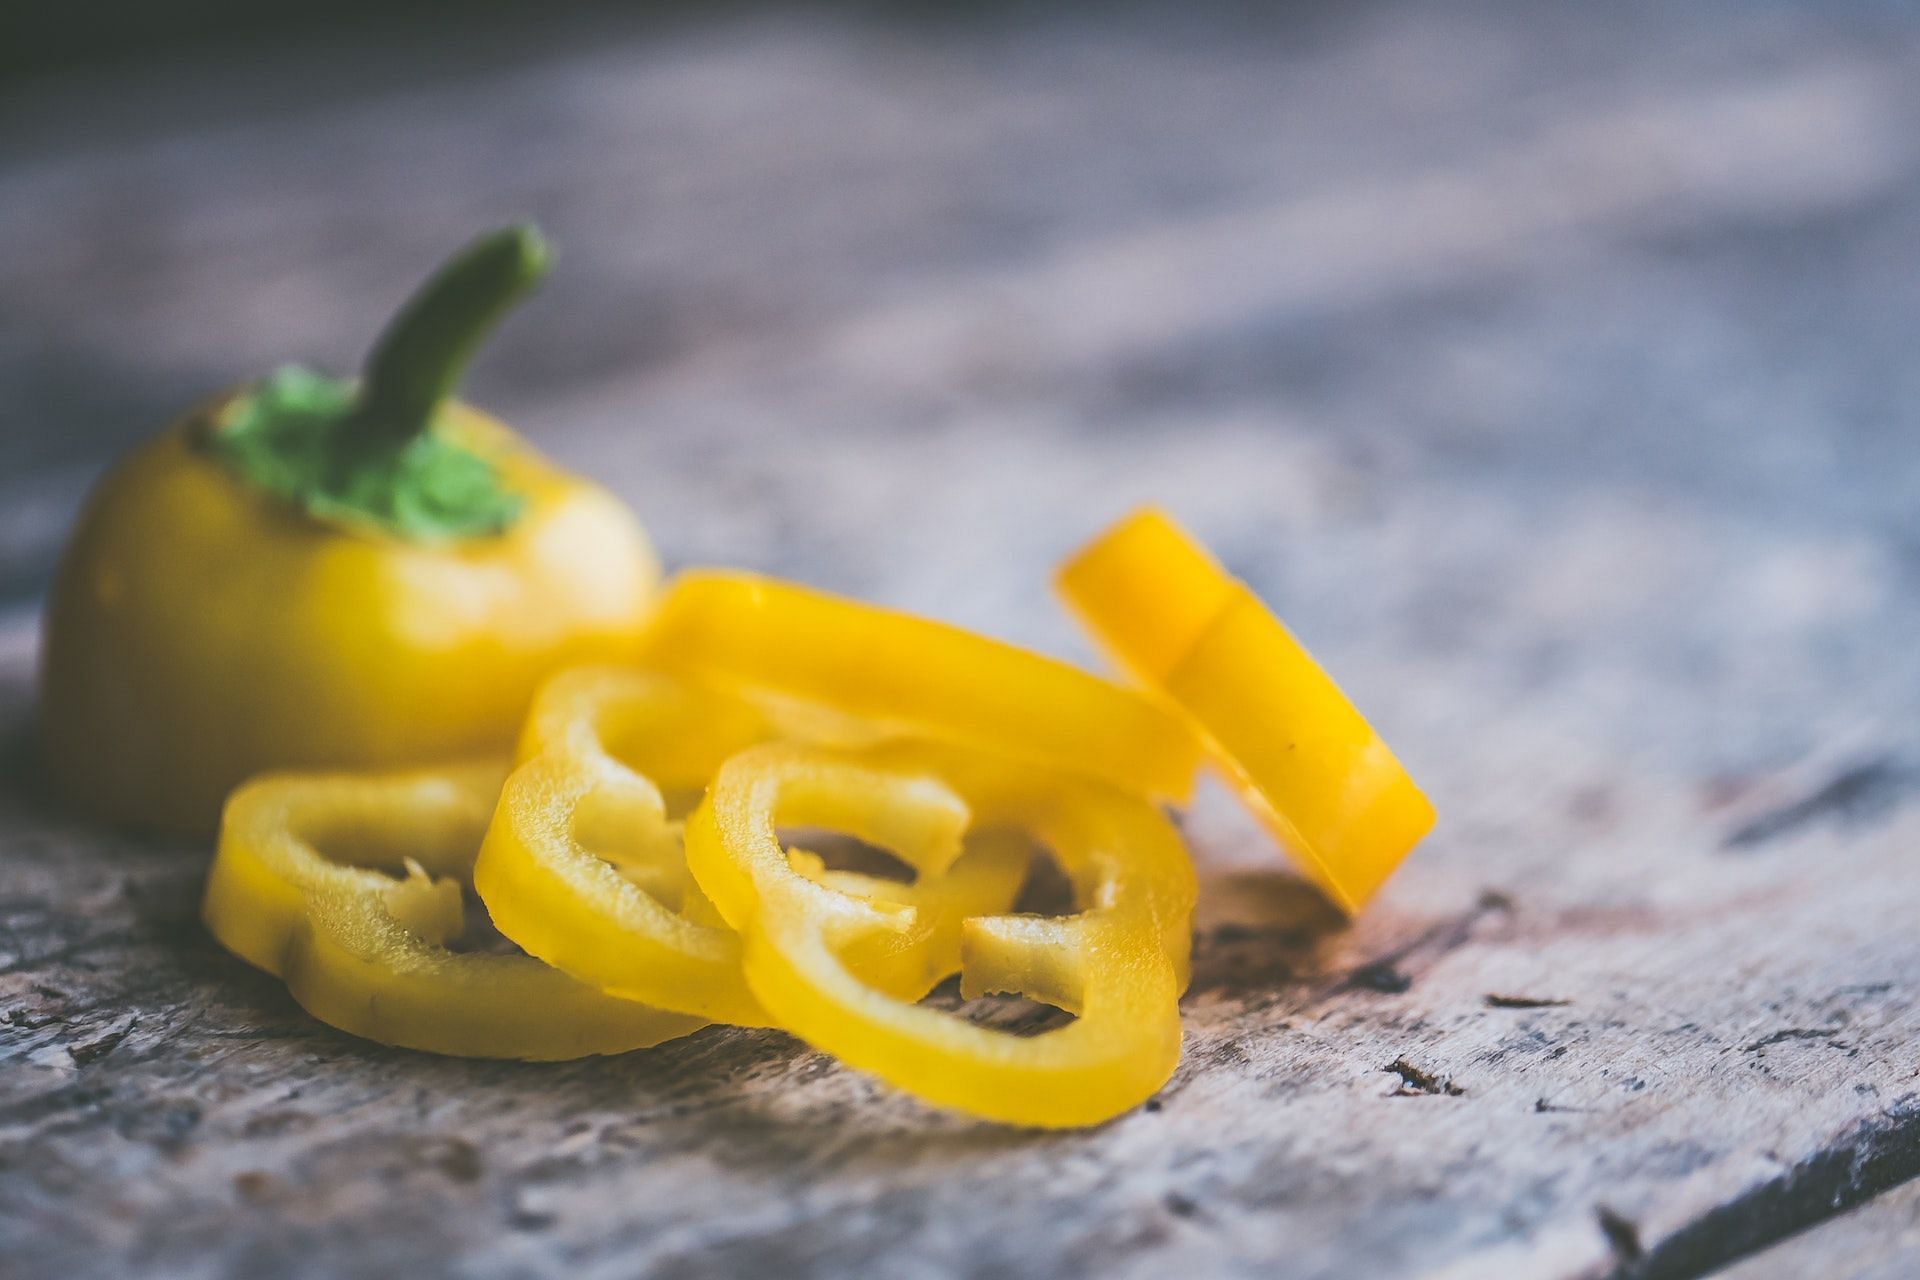 Nutrition in bell peppers make them a healthy addition to a diet. (Photo via Pexels/Jessica Lewis Creative)